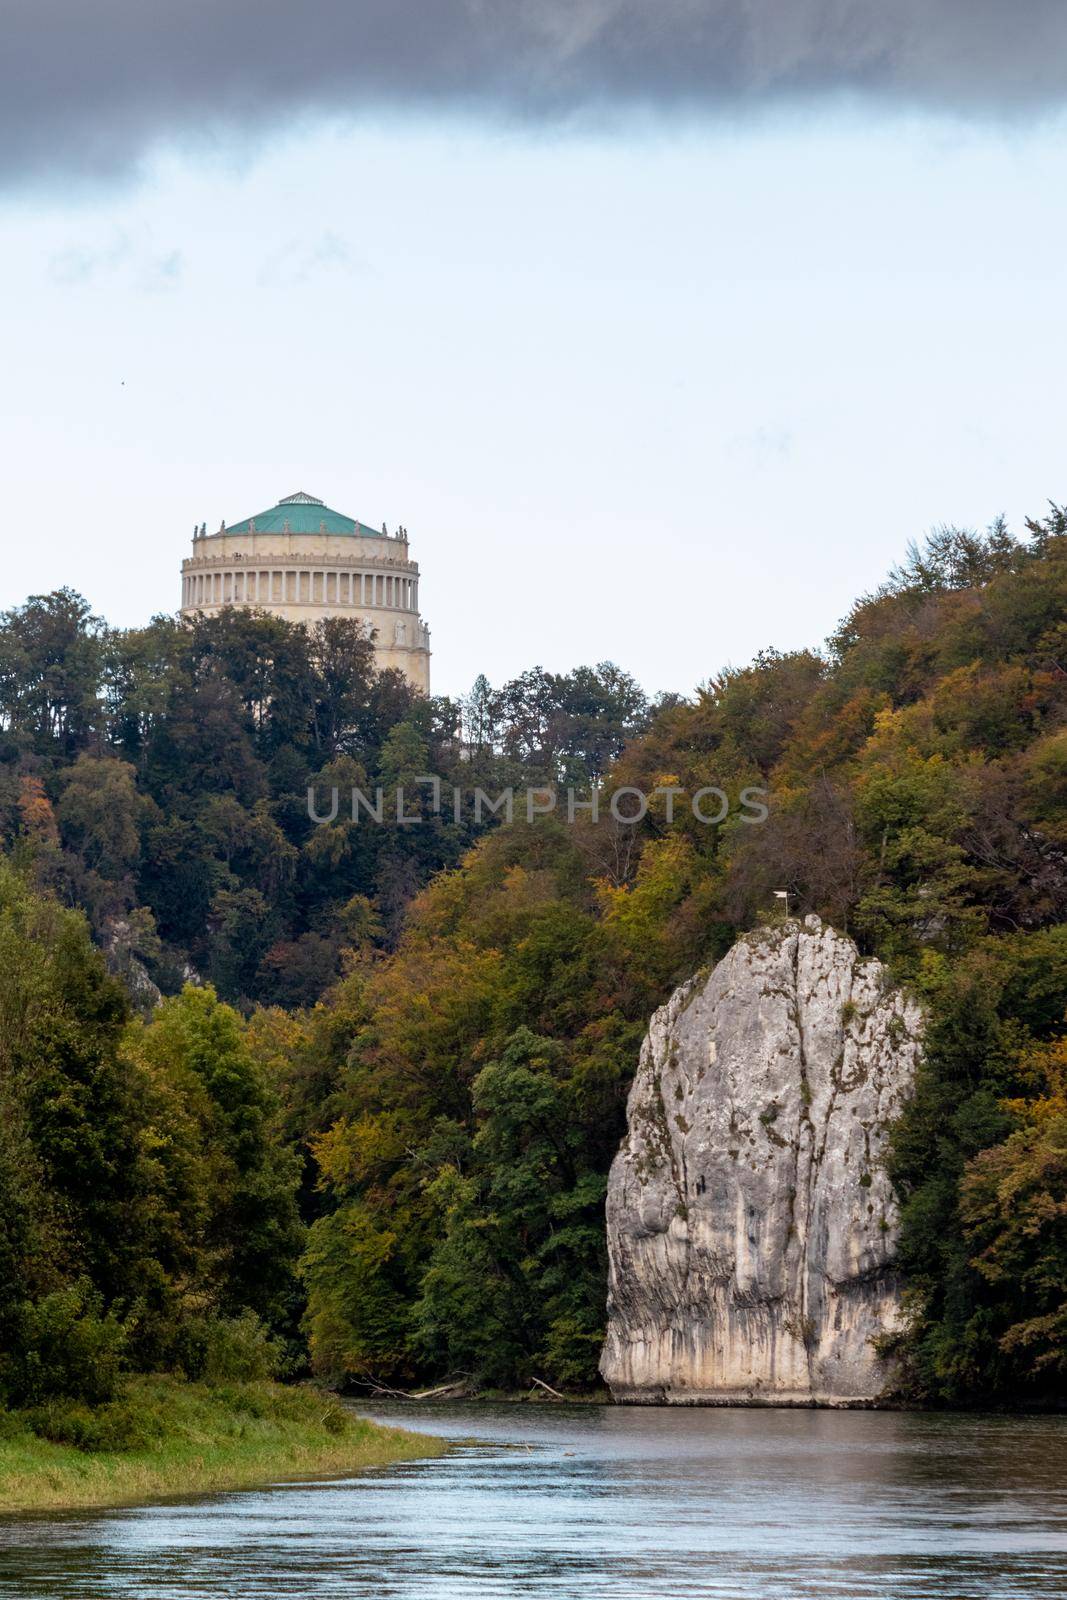 Nature reserve at Danube river breakthrough near Kelheim, Bavaria, Germany in autumn with limestone rock formations and Befreiungshalle on the Michelsberg in the background